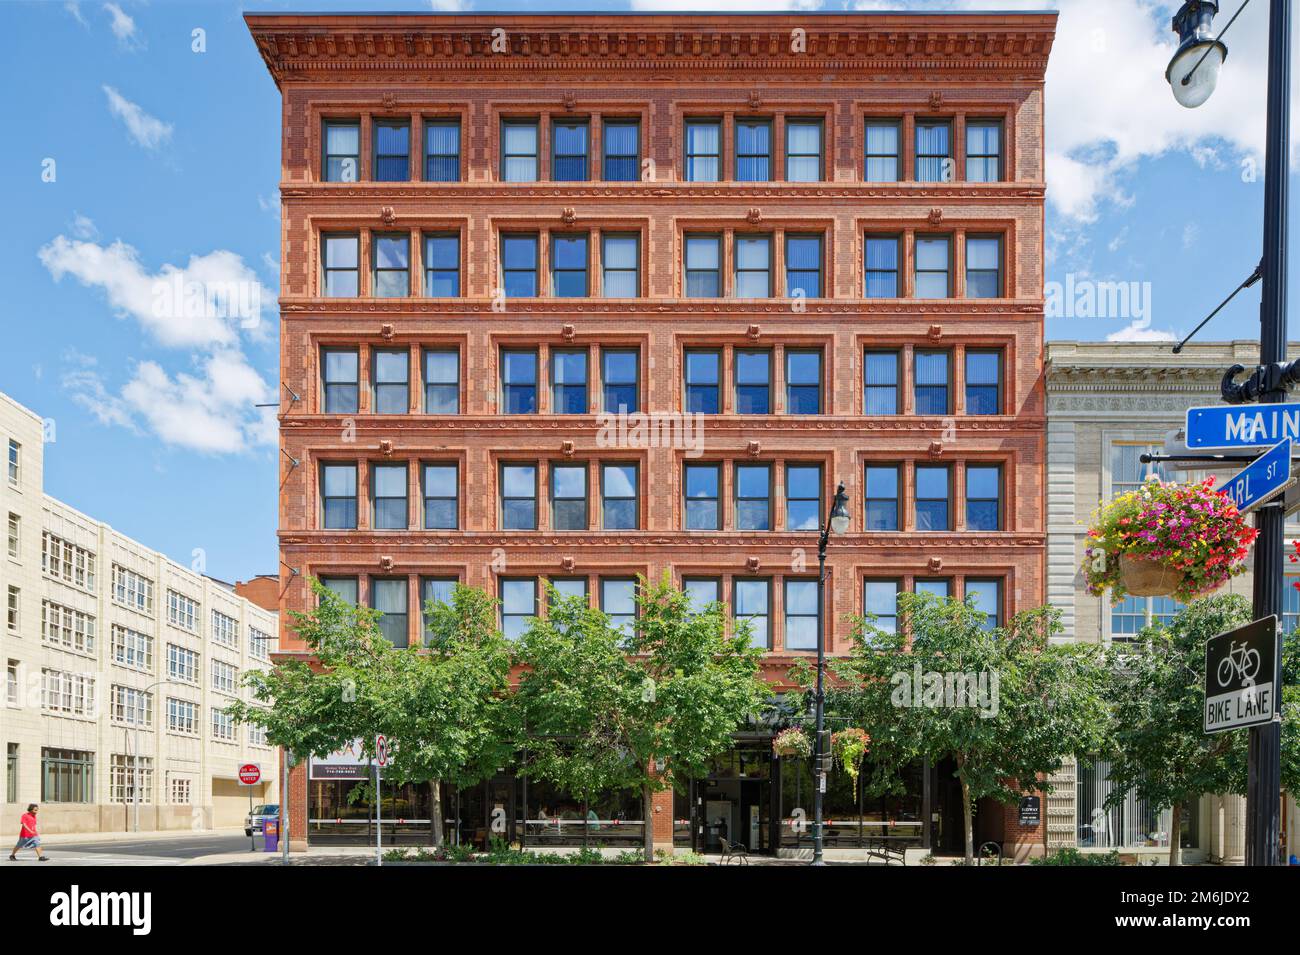 Sidway Building, erected in 1907, grew by two floors in 1913. It was converted from commercial to residential Sidway Lofts & Apartments in 2004. Stock Photo